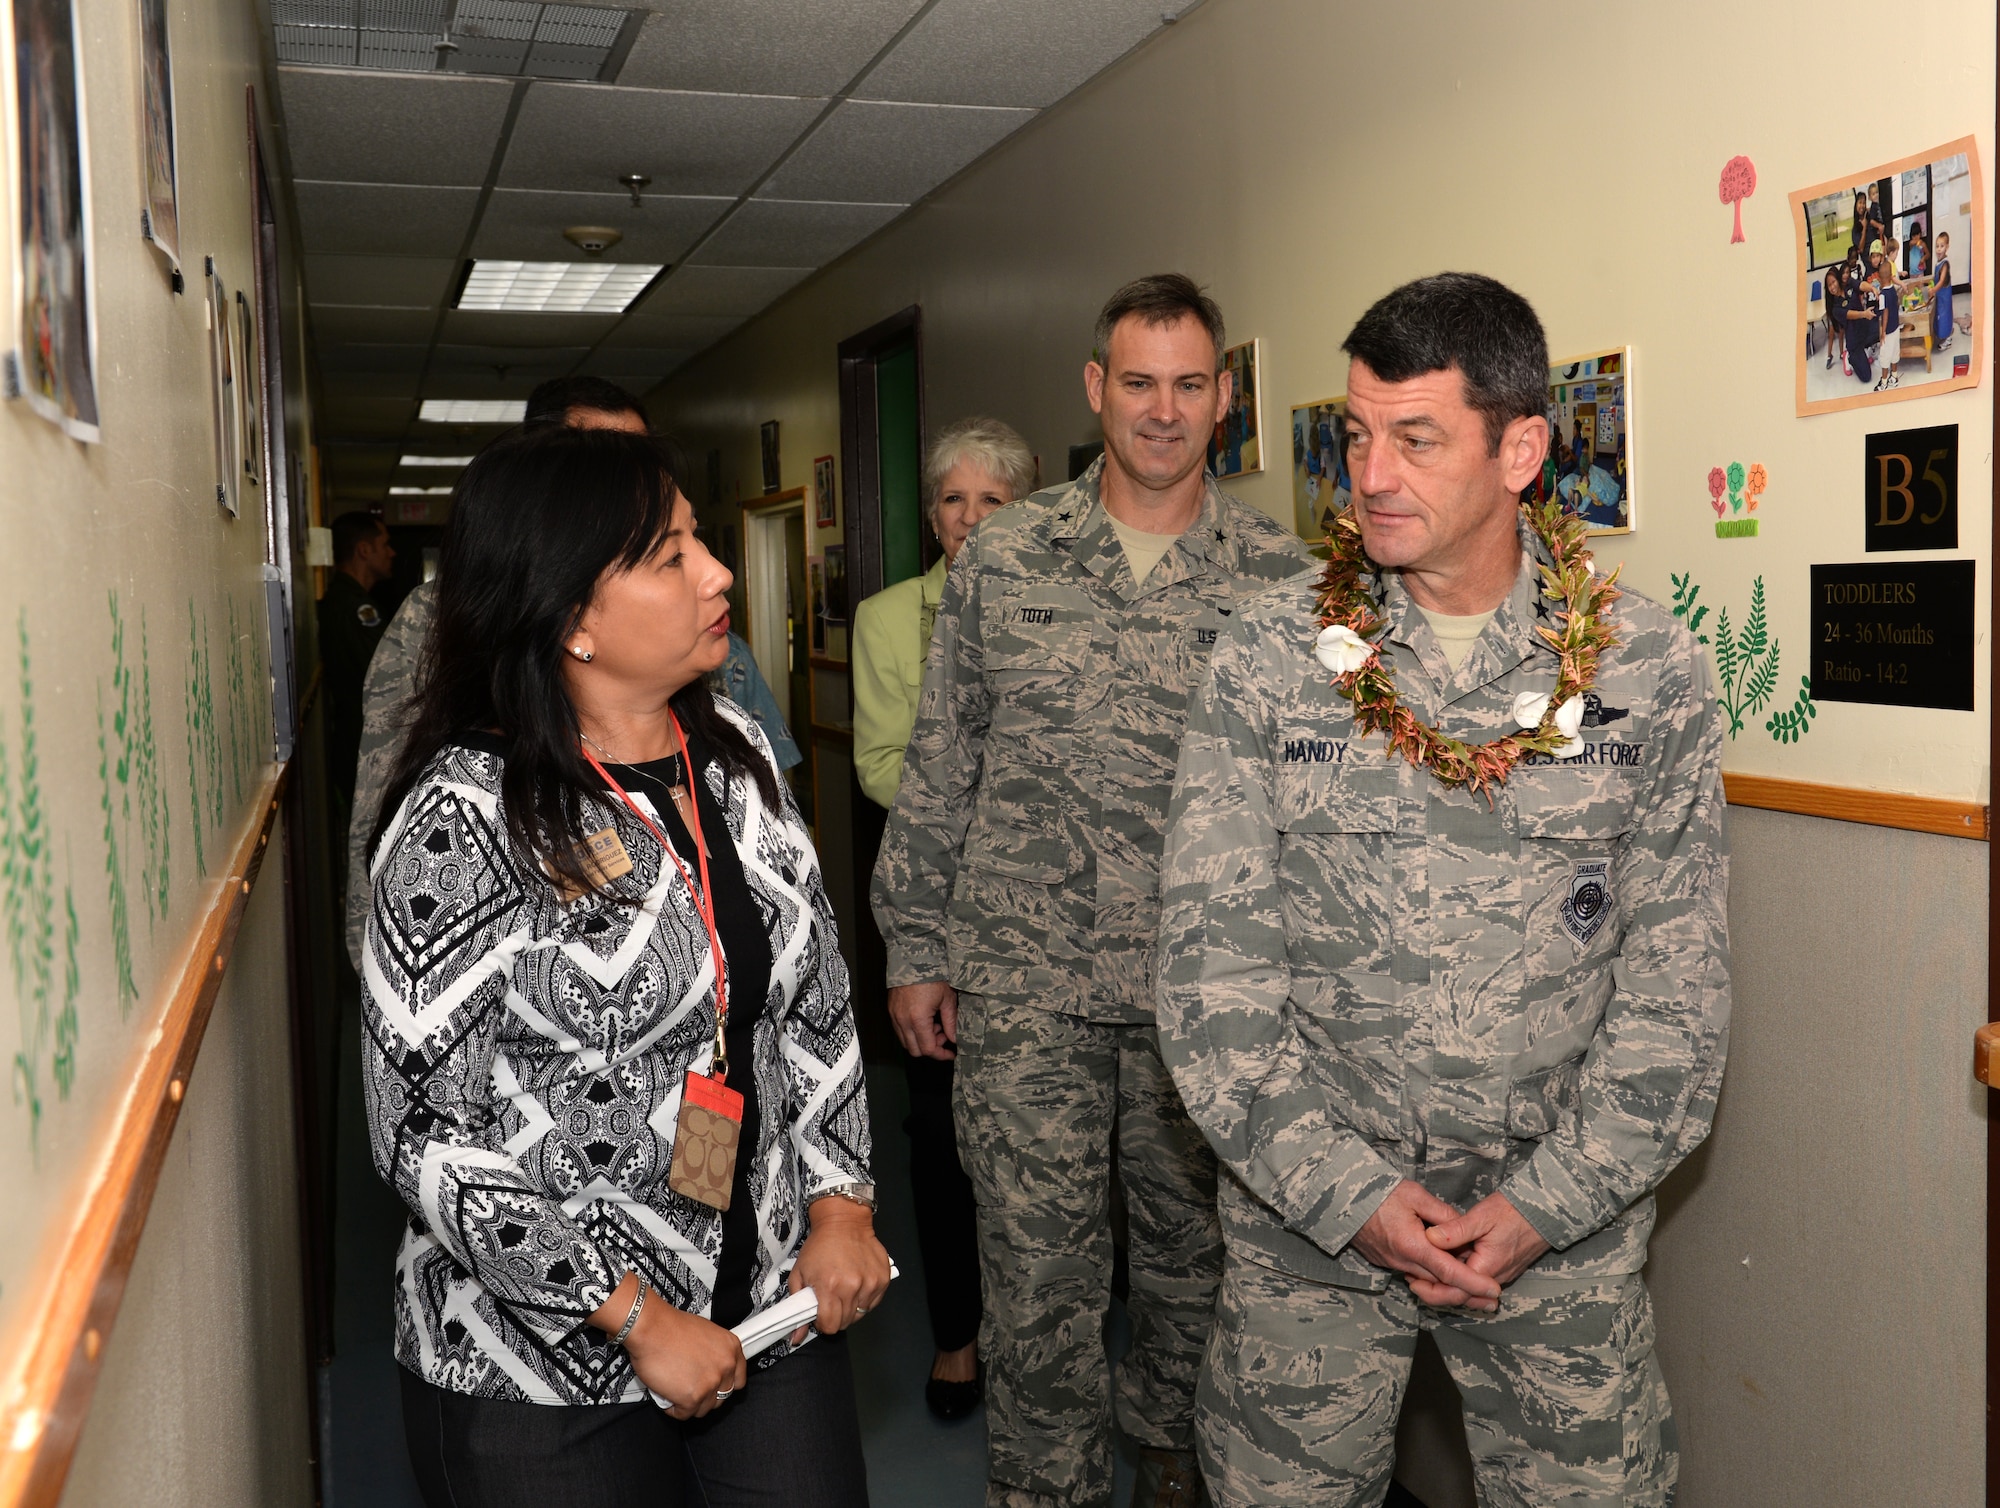 Lt. Gen. Russell Handy, 11th Air Force commander, and Brig. Gen. Andrew Toth, 36th Wing commander, tour the Child Development Center with Jeanette Rodriguez, Airman and Family Services flight chief, Feb. 24, 2015, at Andersen Air Force Base, Guam. During his week-long tour, he also visited different squadrons around Andersen and held an Airman’s call to discuss the strategic rebalance to the Pacific. (U.S. Air Force photo by Senior Airman Amanda Morris/Released)